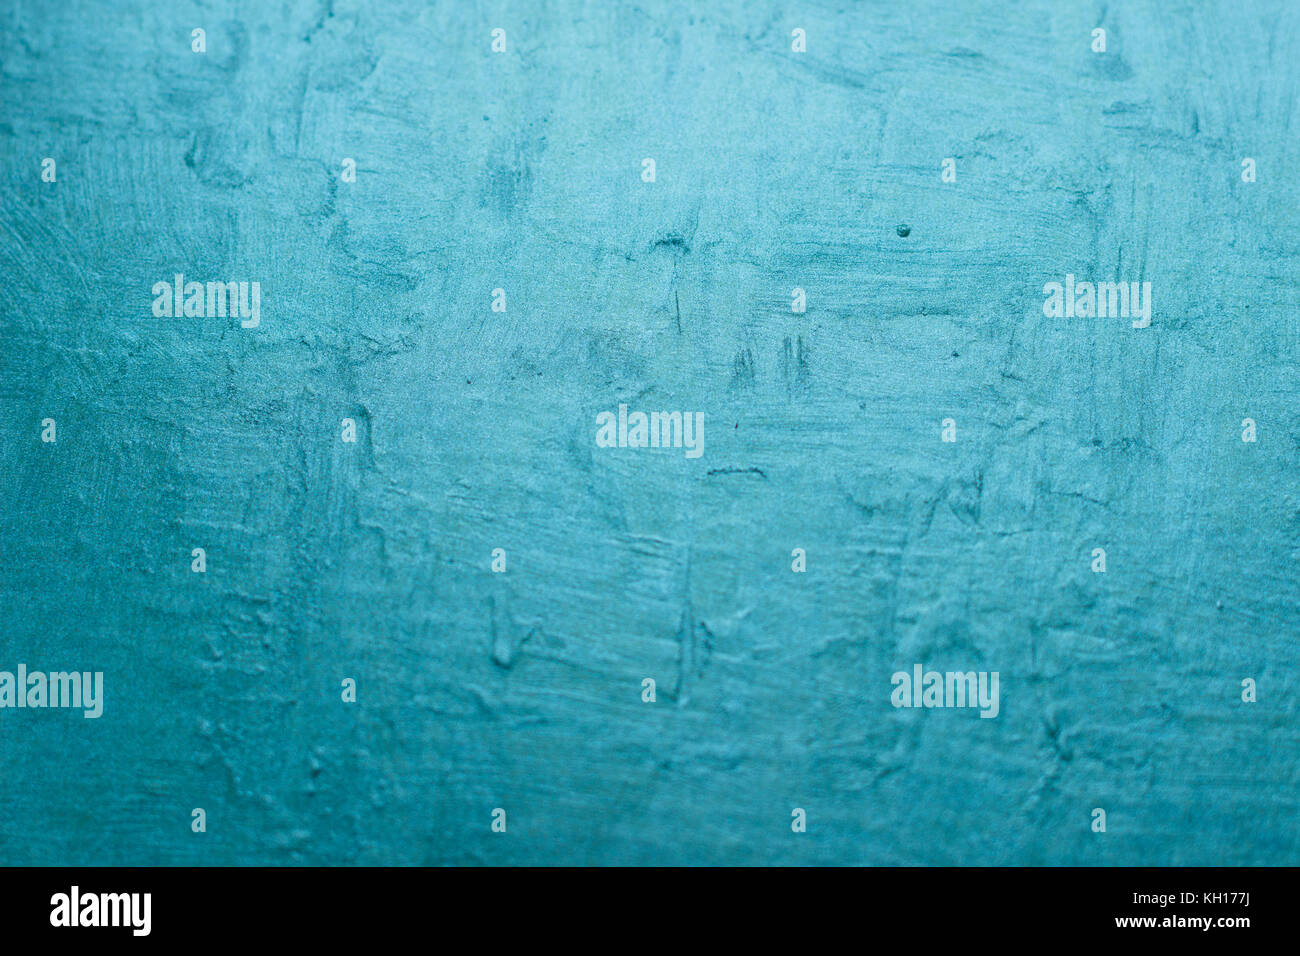 Blue textures background close up Stock Photo